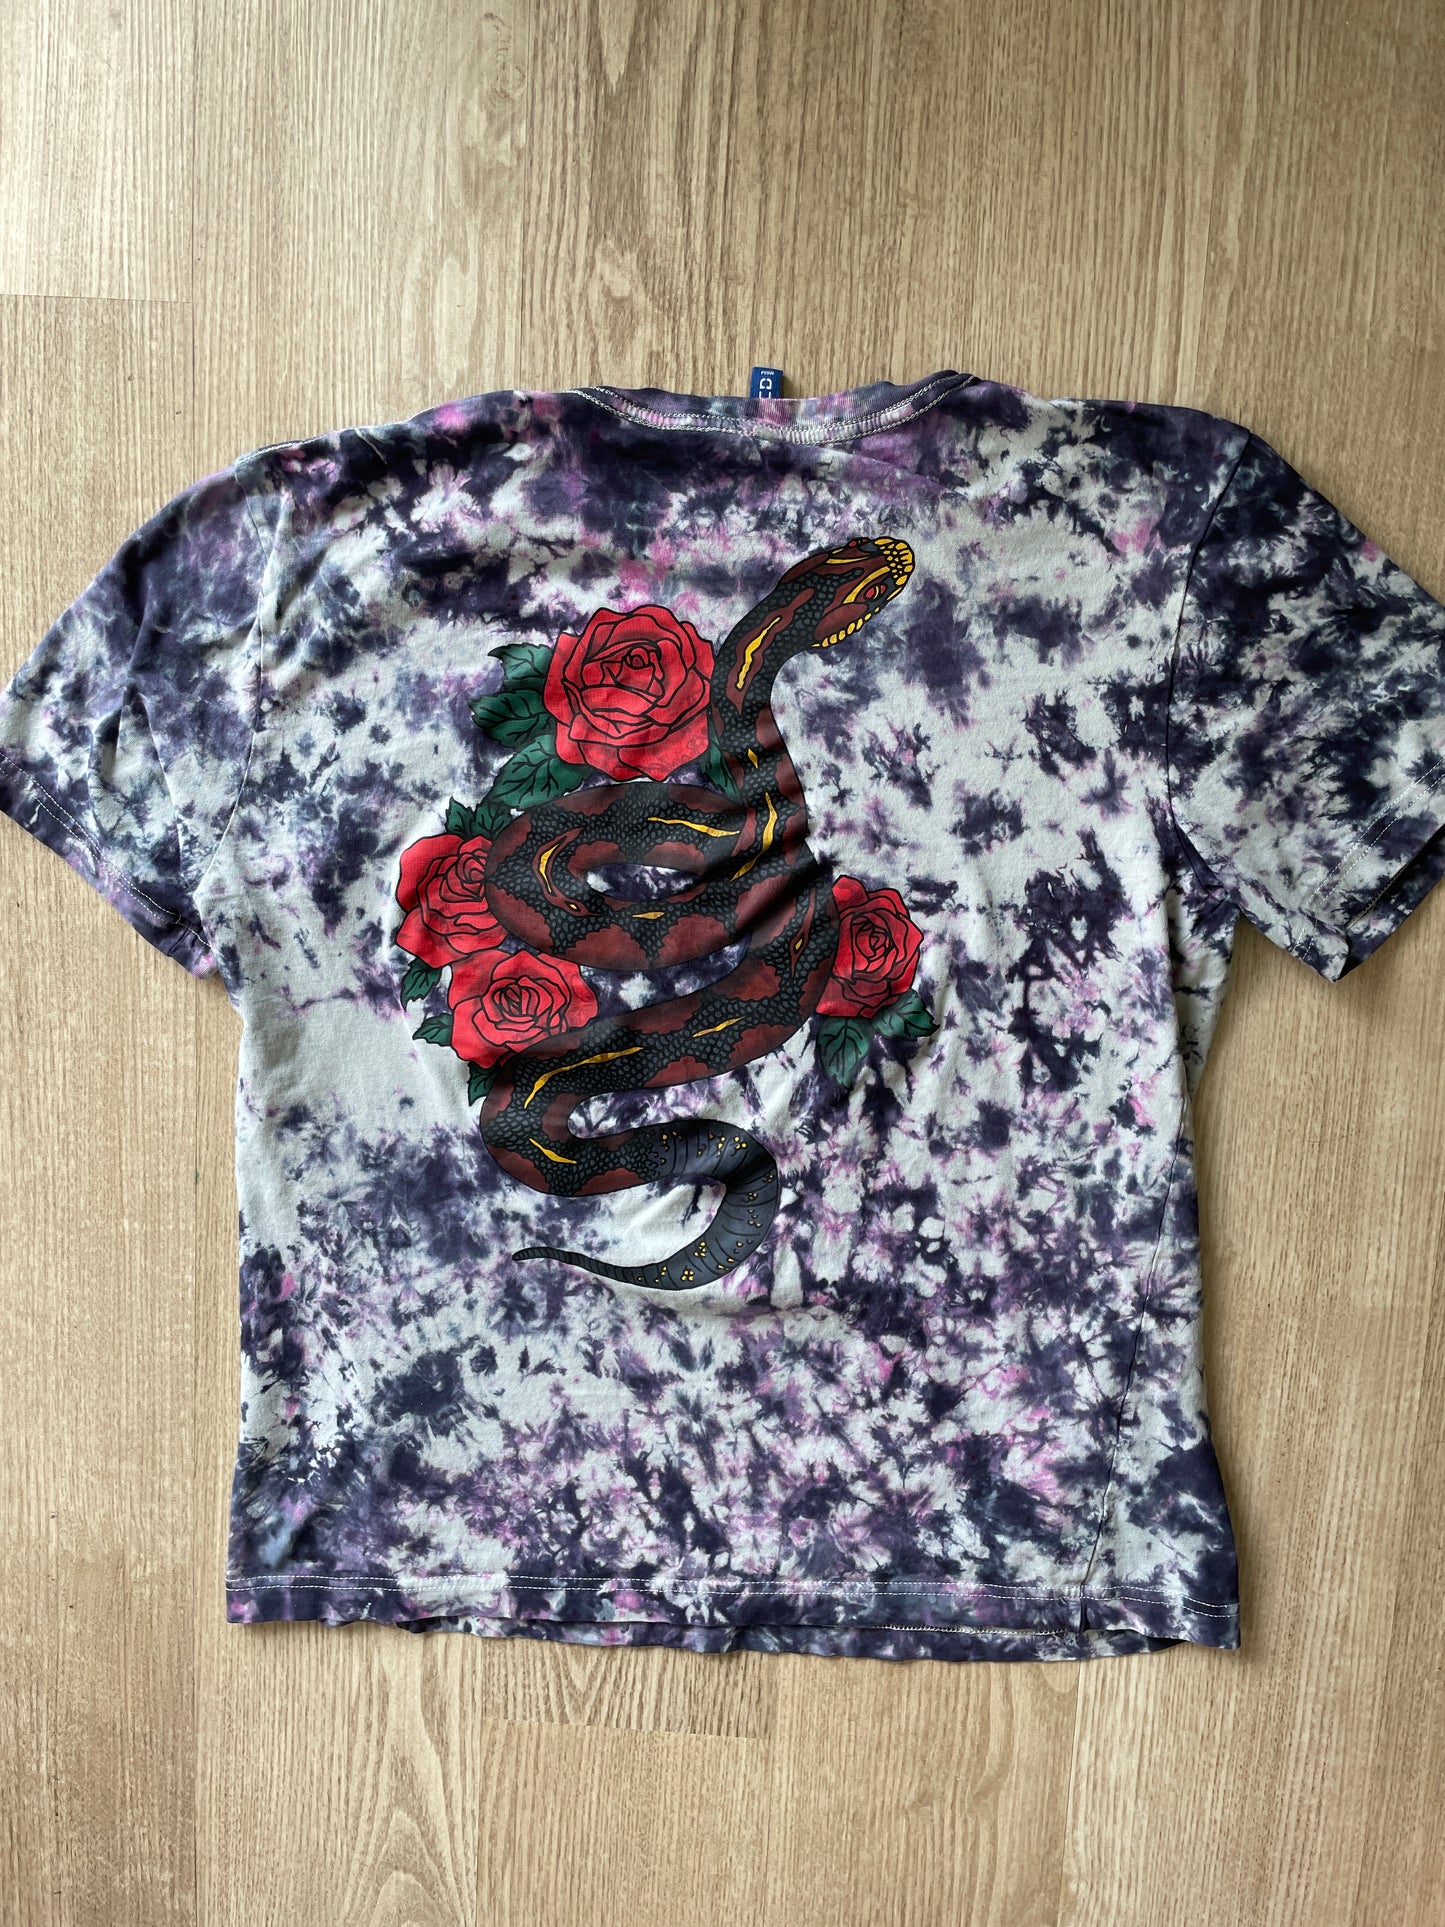 MEDIUM Women’s Snake and Roses Tie Dye Short Sleeve T-Shirt | One-Of-a-Kind Upcycled Black, Pink, and White Crumpled Top